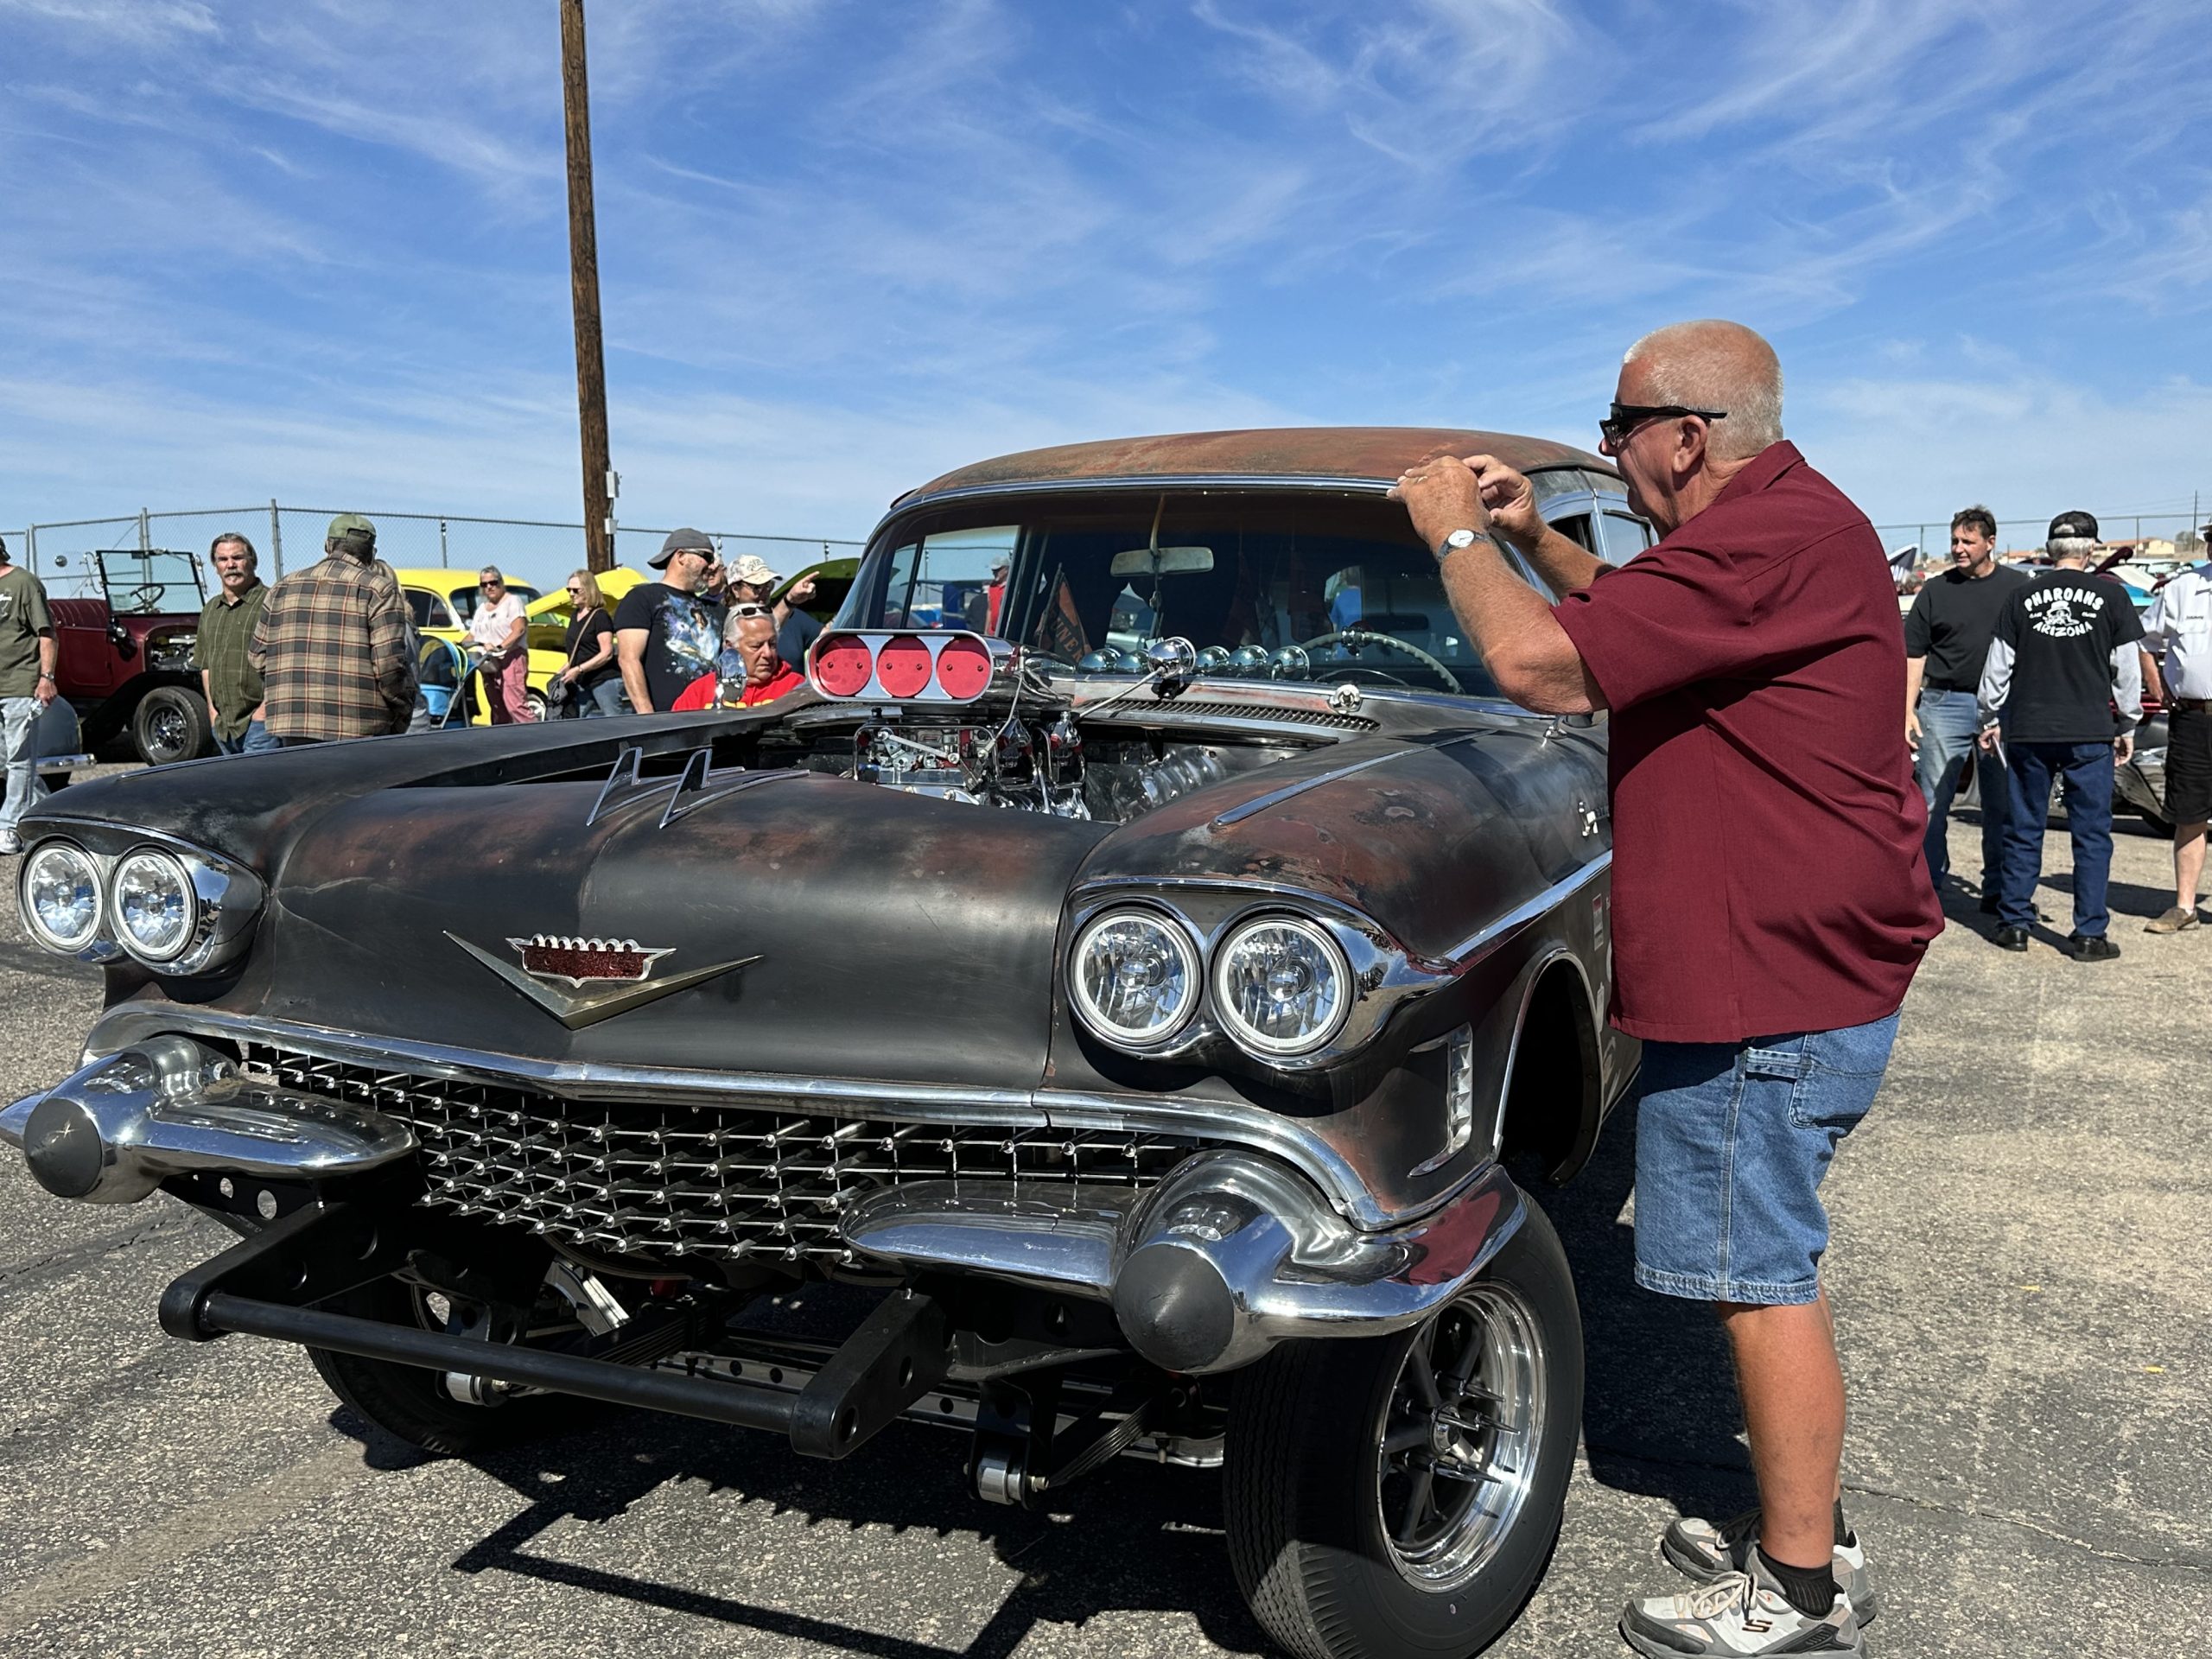 Enthusiasts Gather At Annual Crossroads Car And Bike Show